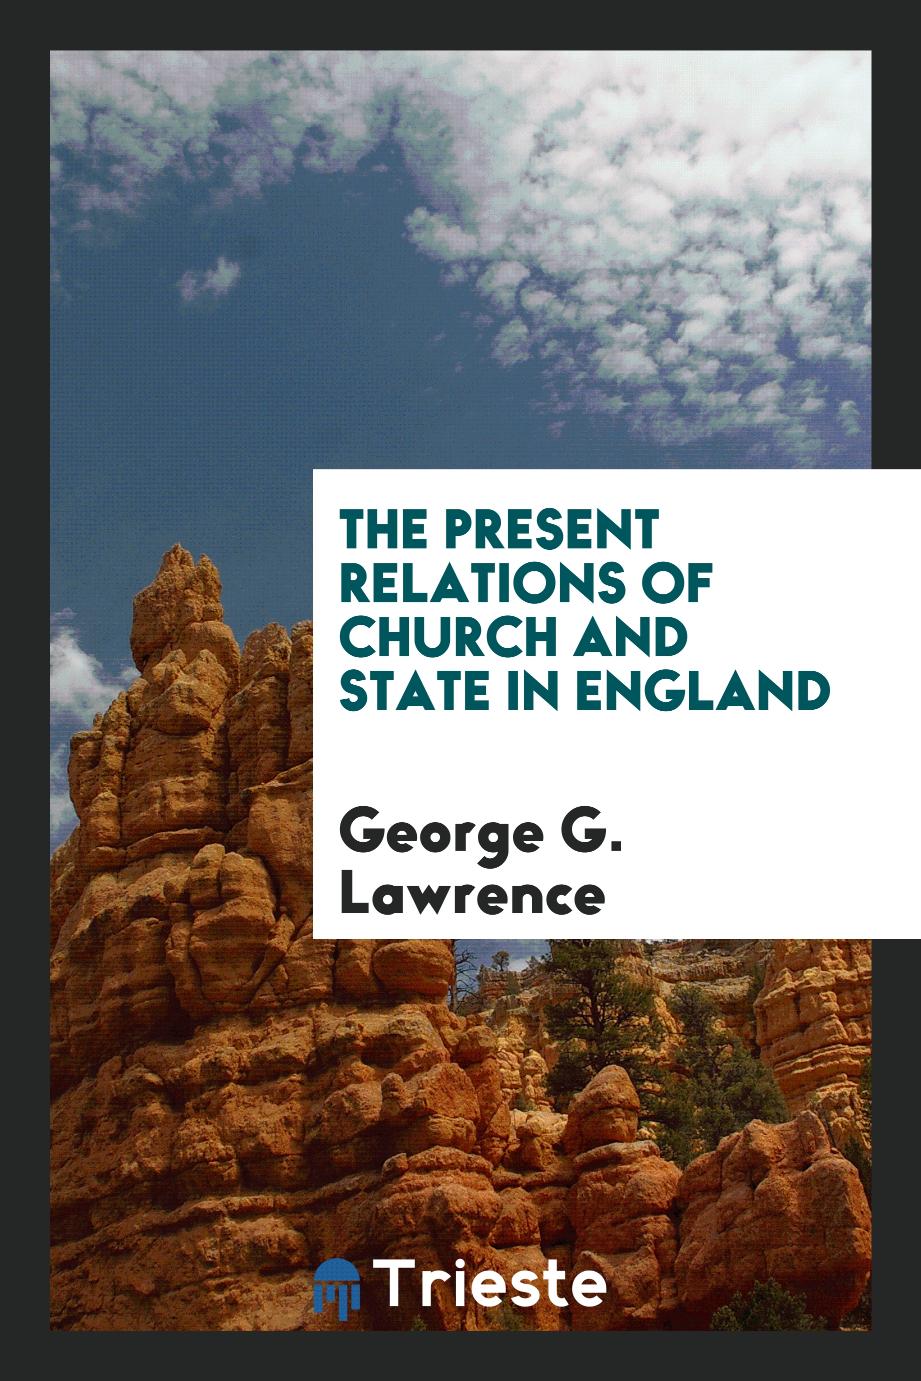 The present relations of church and state in England